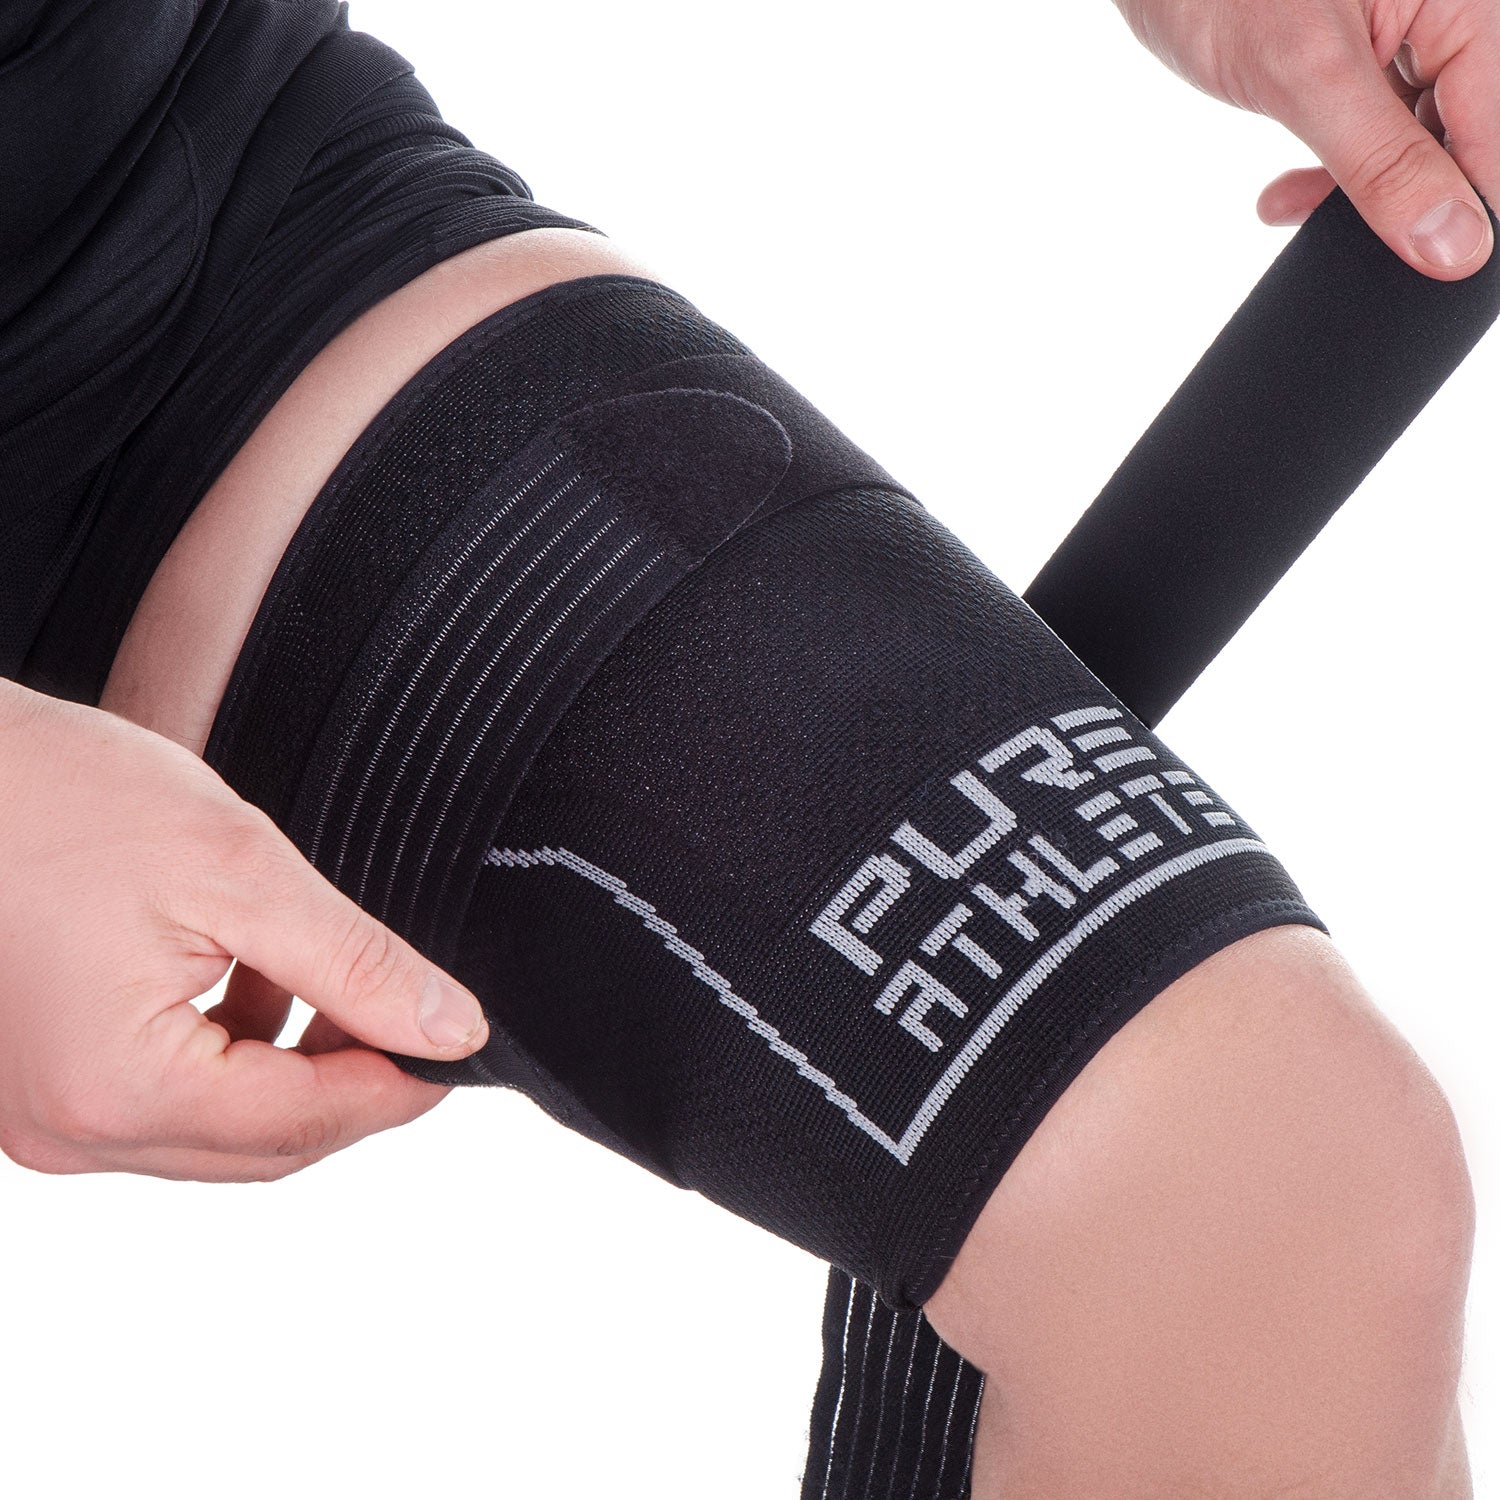 Thigh Support Compression Sleeve - United Ortho